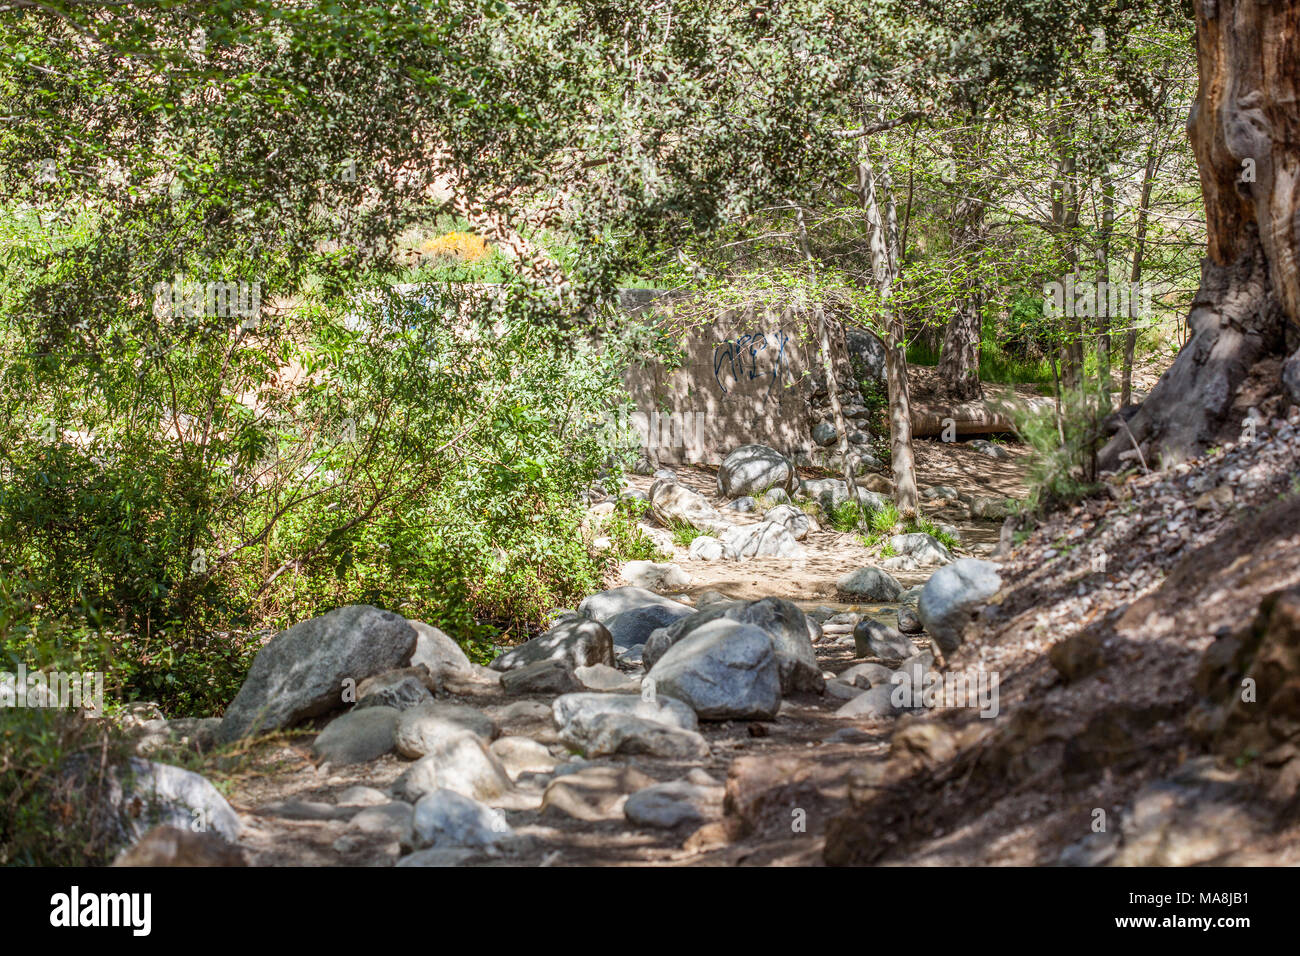 Eaton Canyon Natural Area is a 190-acre zoological, botanical, and geological nature preserve situated at the base of the beautiful San Gabriel Mounta Stock Photo